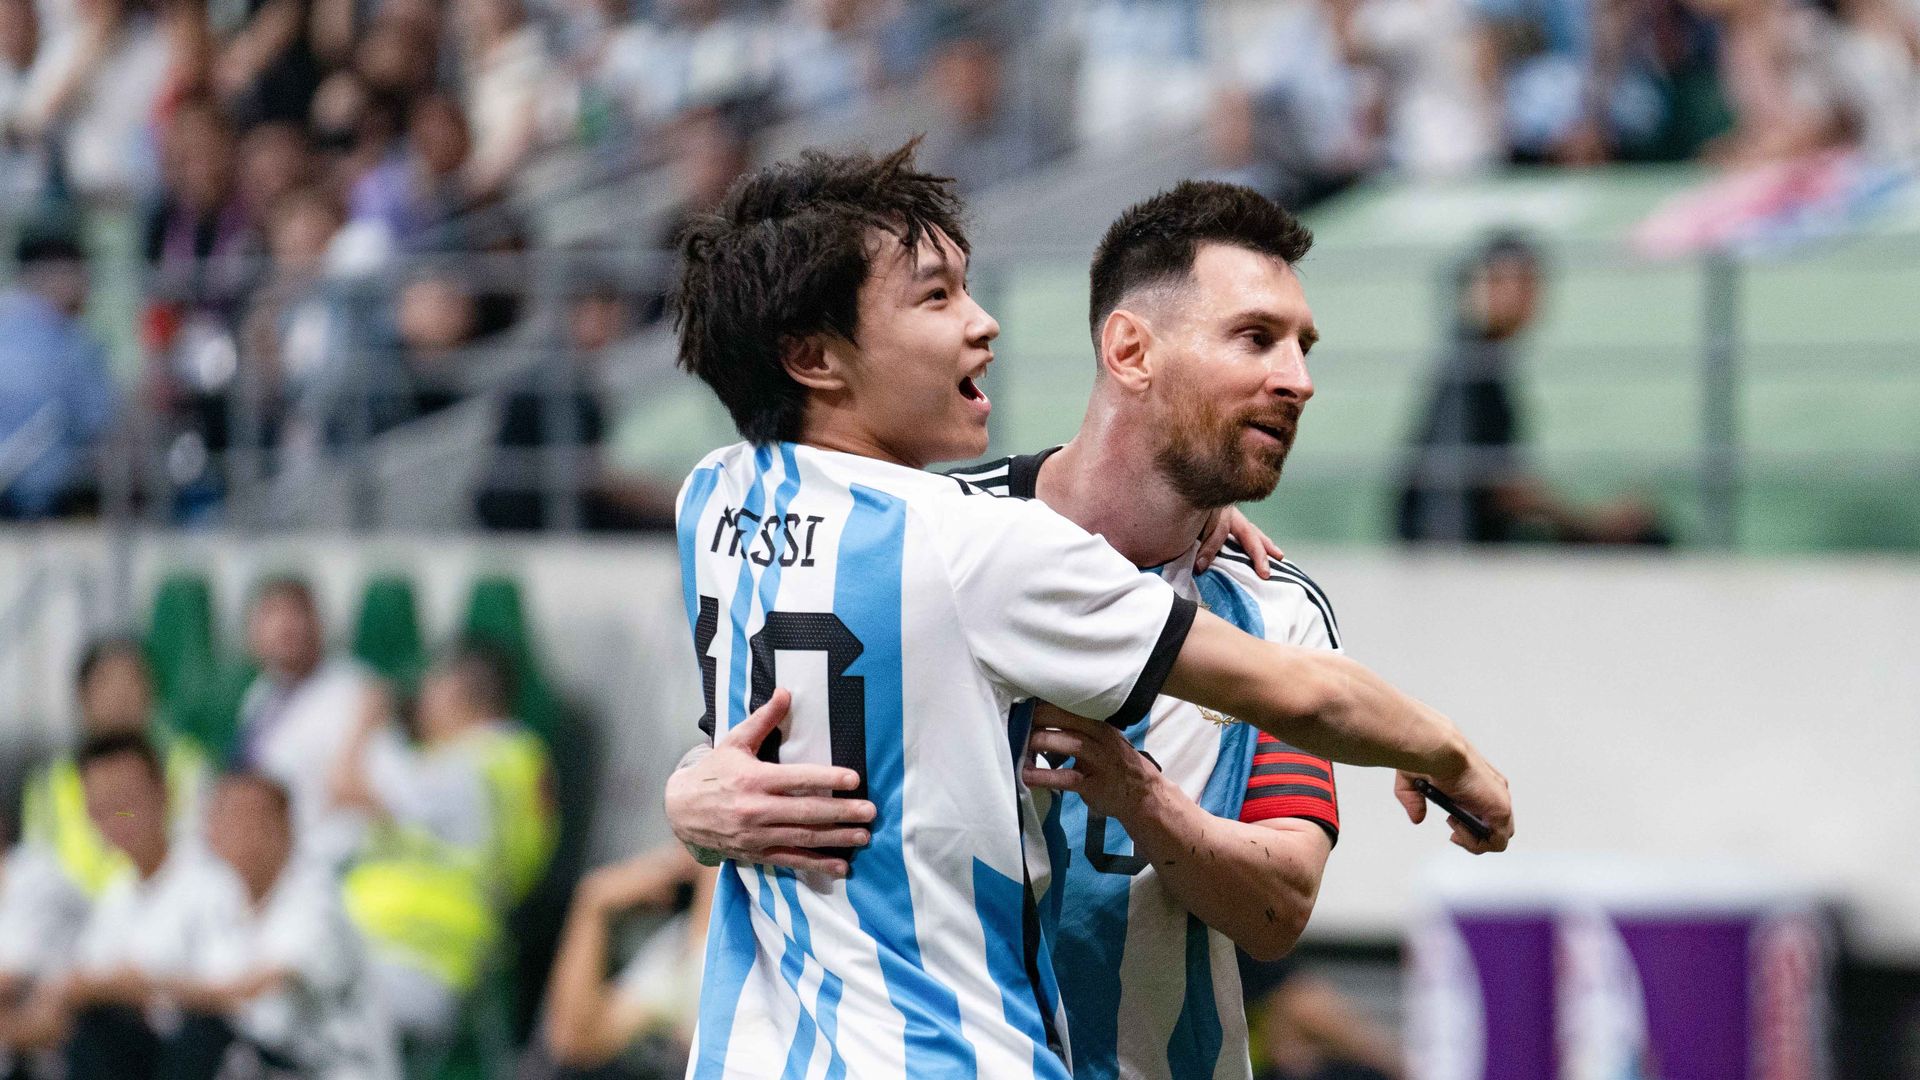 A pitch-invading fan L hugs Lionel Messi of Argentina during an international football invitational between Argentina and Australia in Beijing, capital of China, June 15, 2023. (Photo by Xie Han/Xinhua via Getty Images)